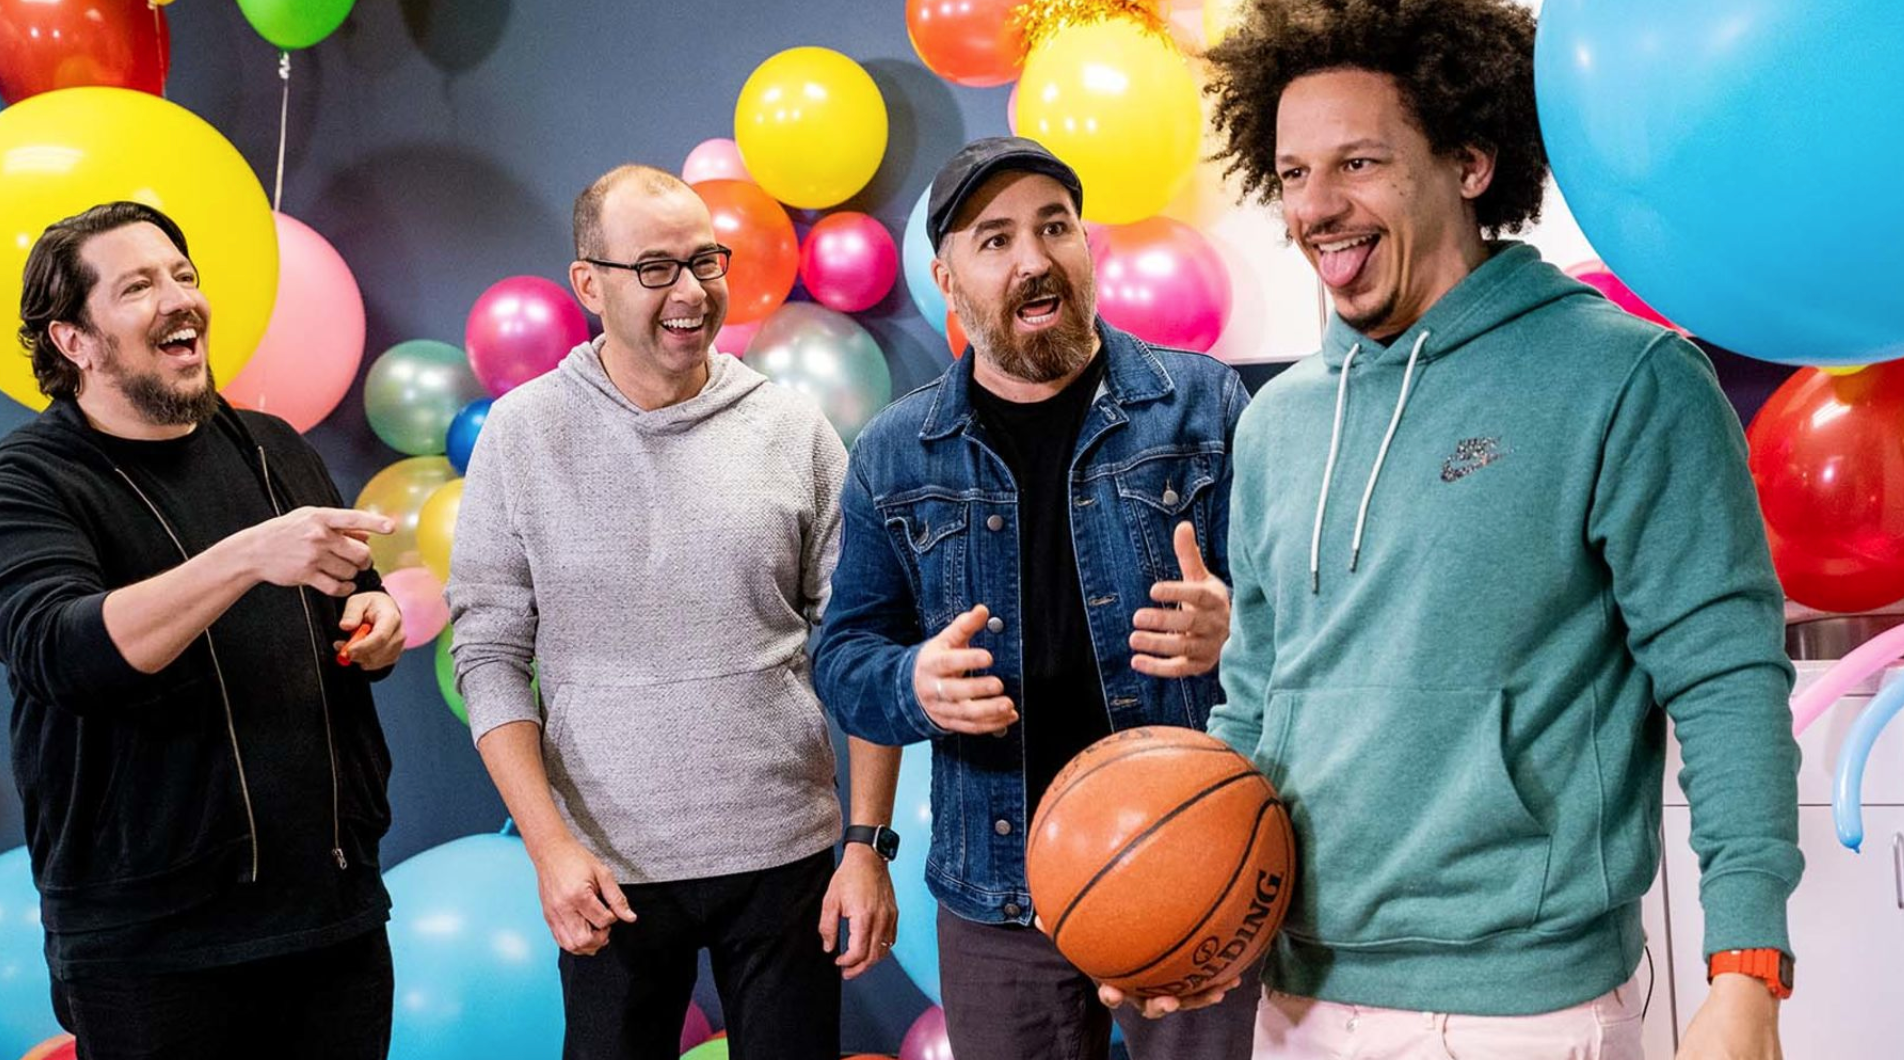 Impractical Jokers returns with Eric Andre How to watch, streaming info